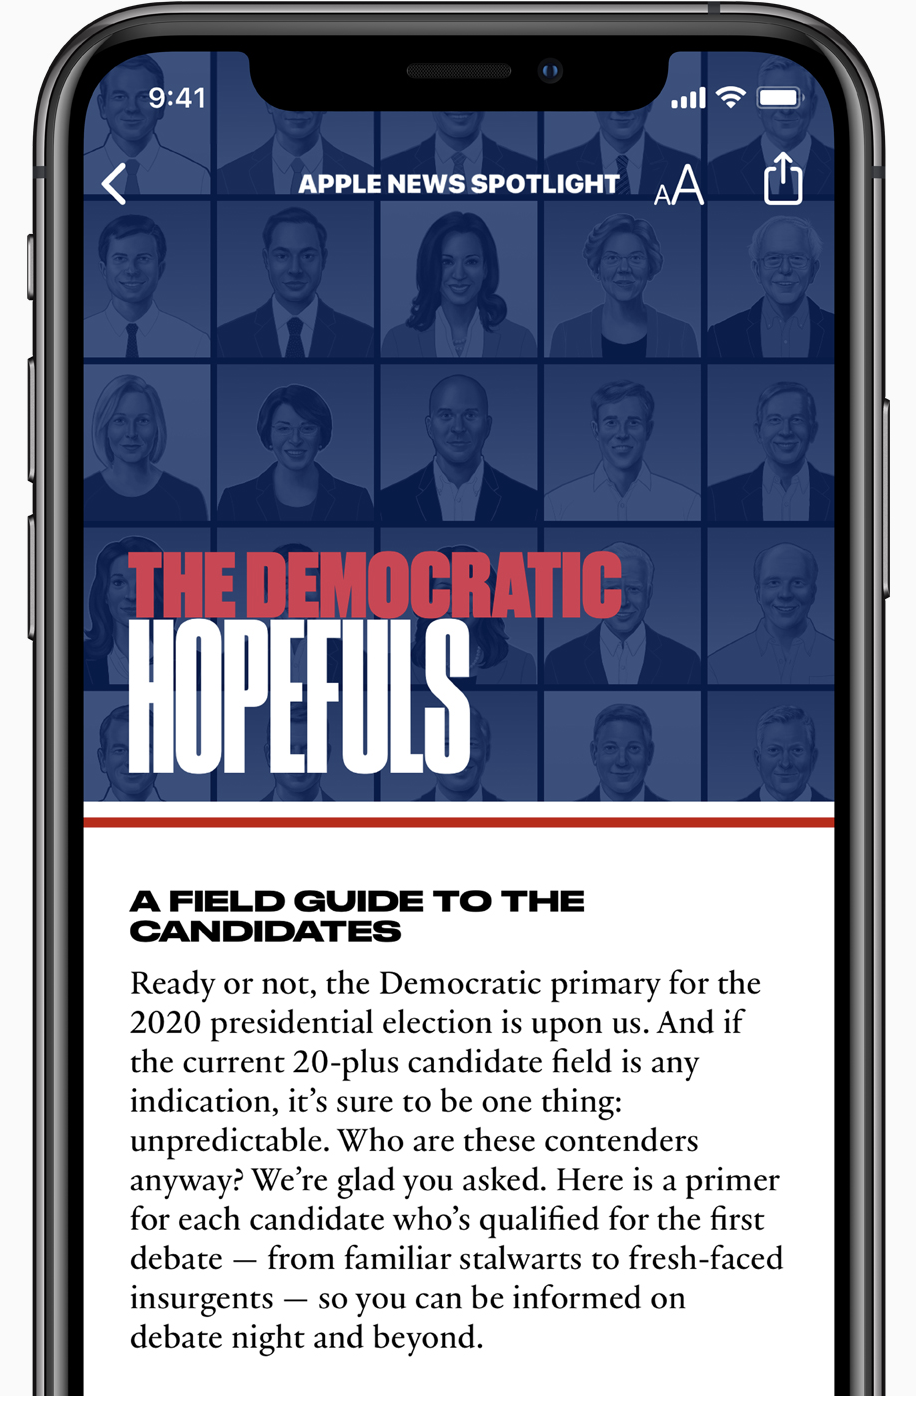 Apple News launches candidate guide ahead of 2020 Democratic debates